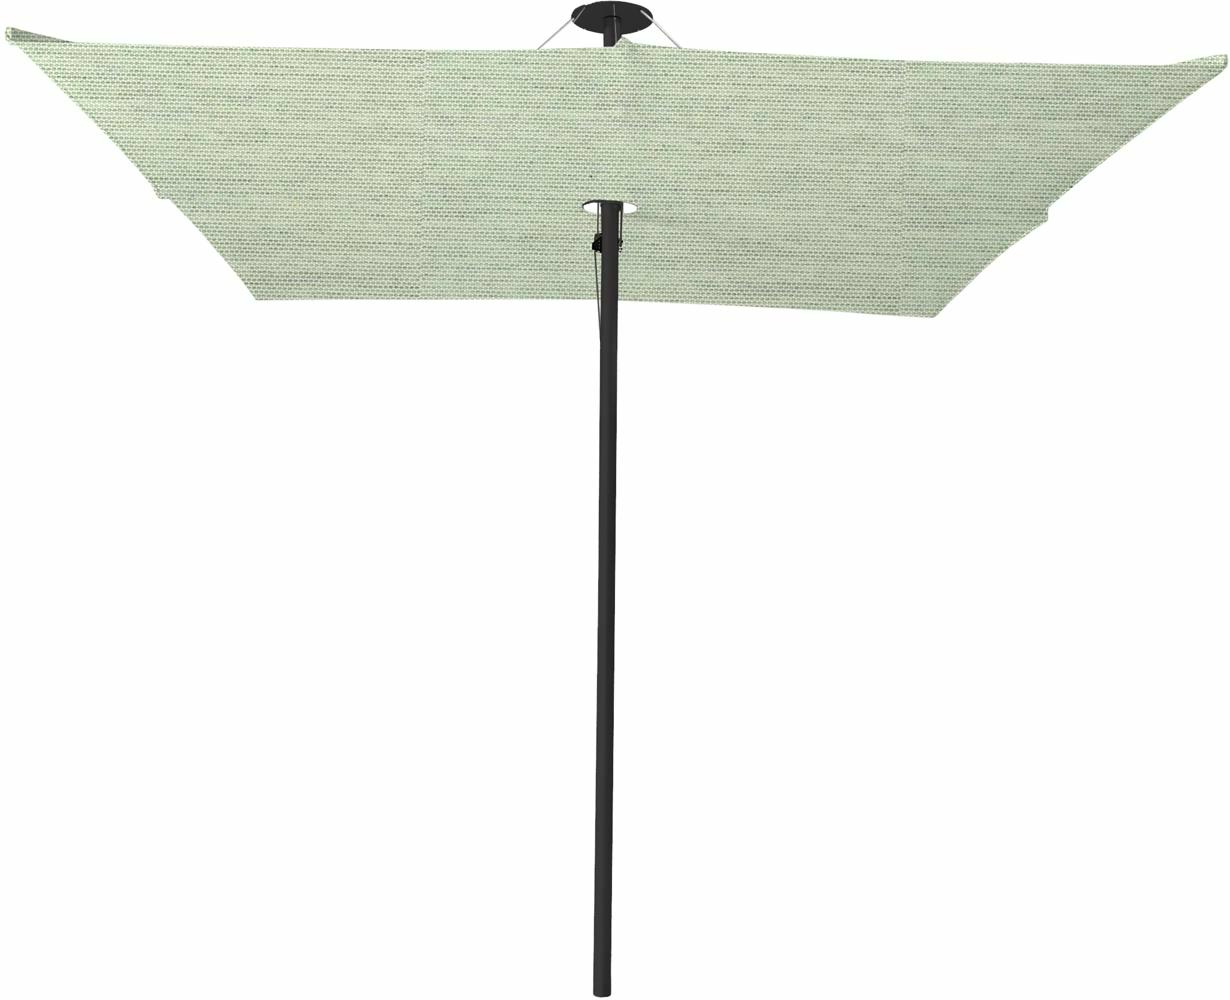 Infina center post umbrella, 3 m square, with frame in Dusk and Solidum Mint canopy. 